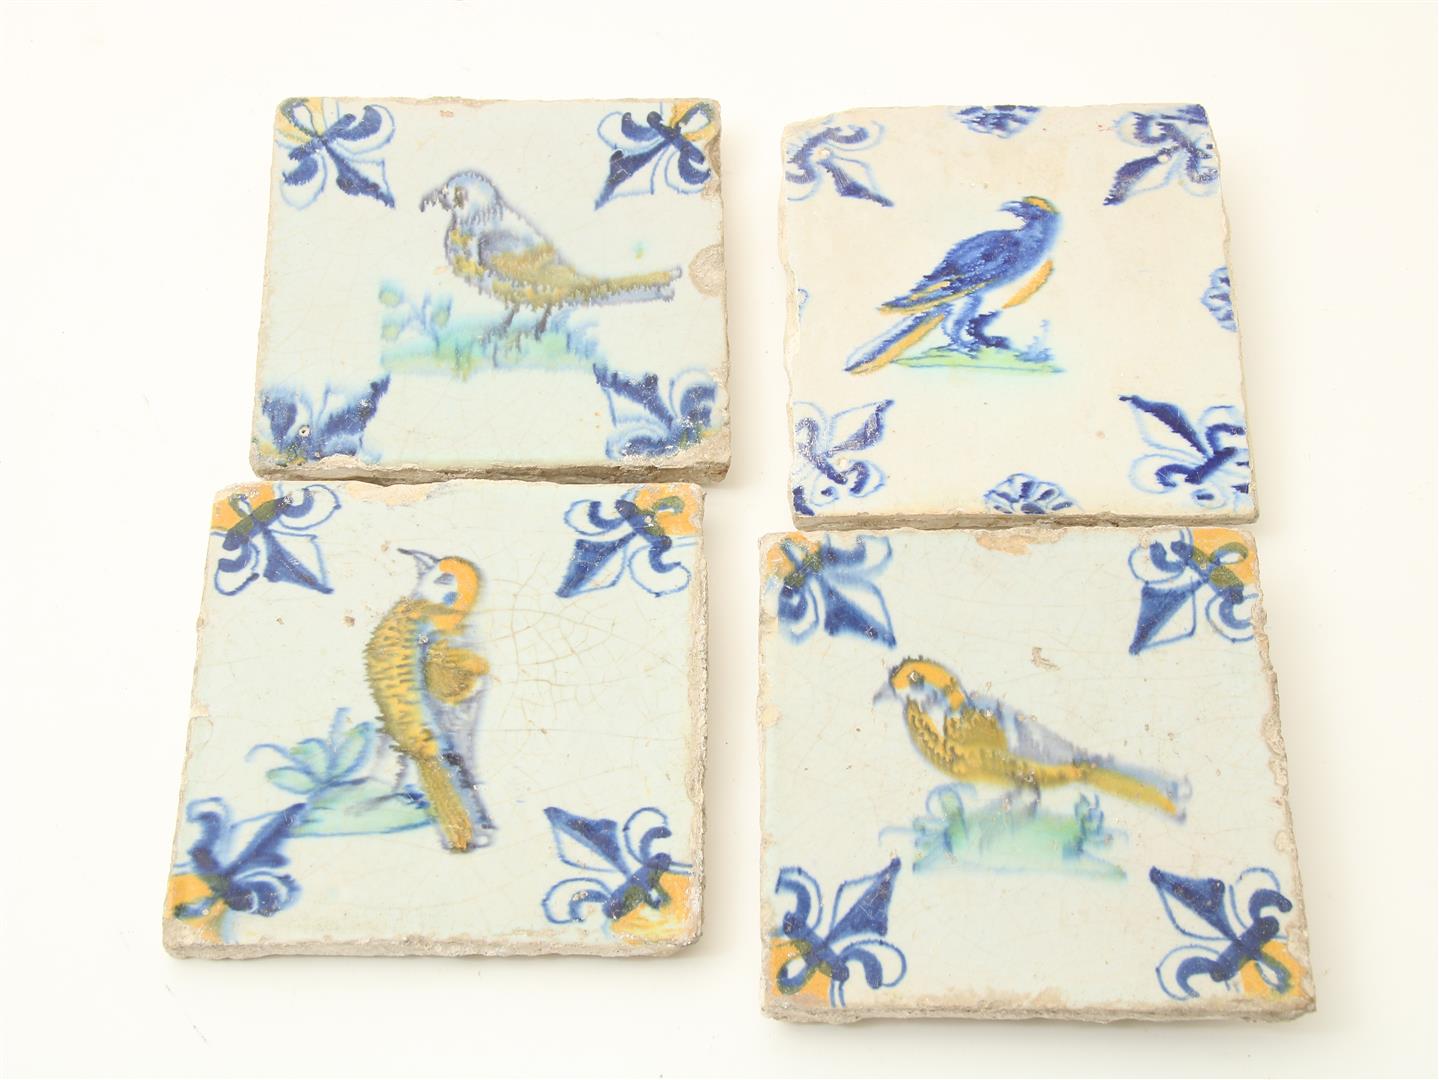 Lot of 4 16th century tiles decorated with polychrome birds, French Lily corner motif, 13 x 13 x 1.2